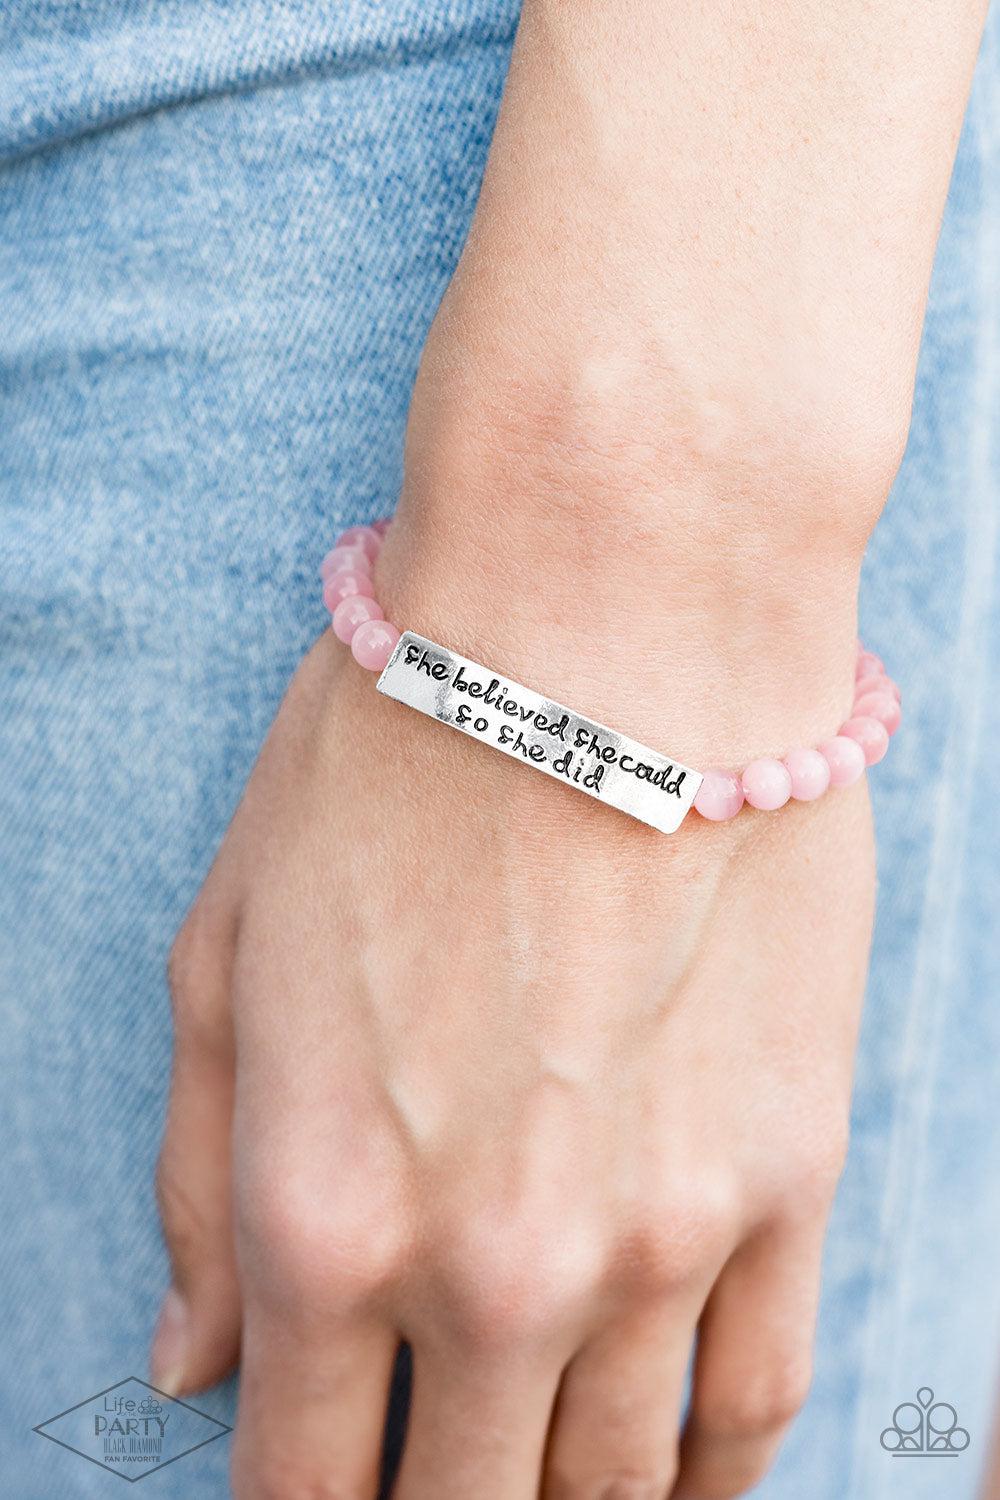 So She Did Inspirational Pink Cat's Eye Stone Bracelet - Paparazzi Accessories- lightbox - CarasShop.com - $5 Jewelry by Cara Jewels